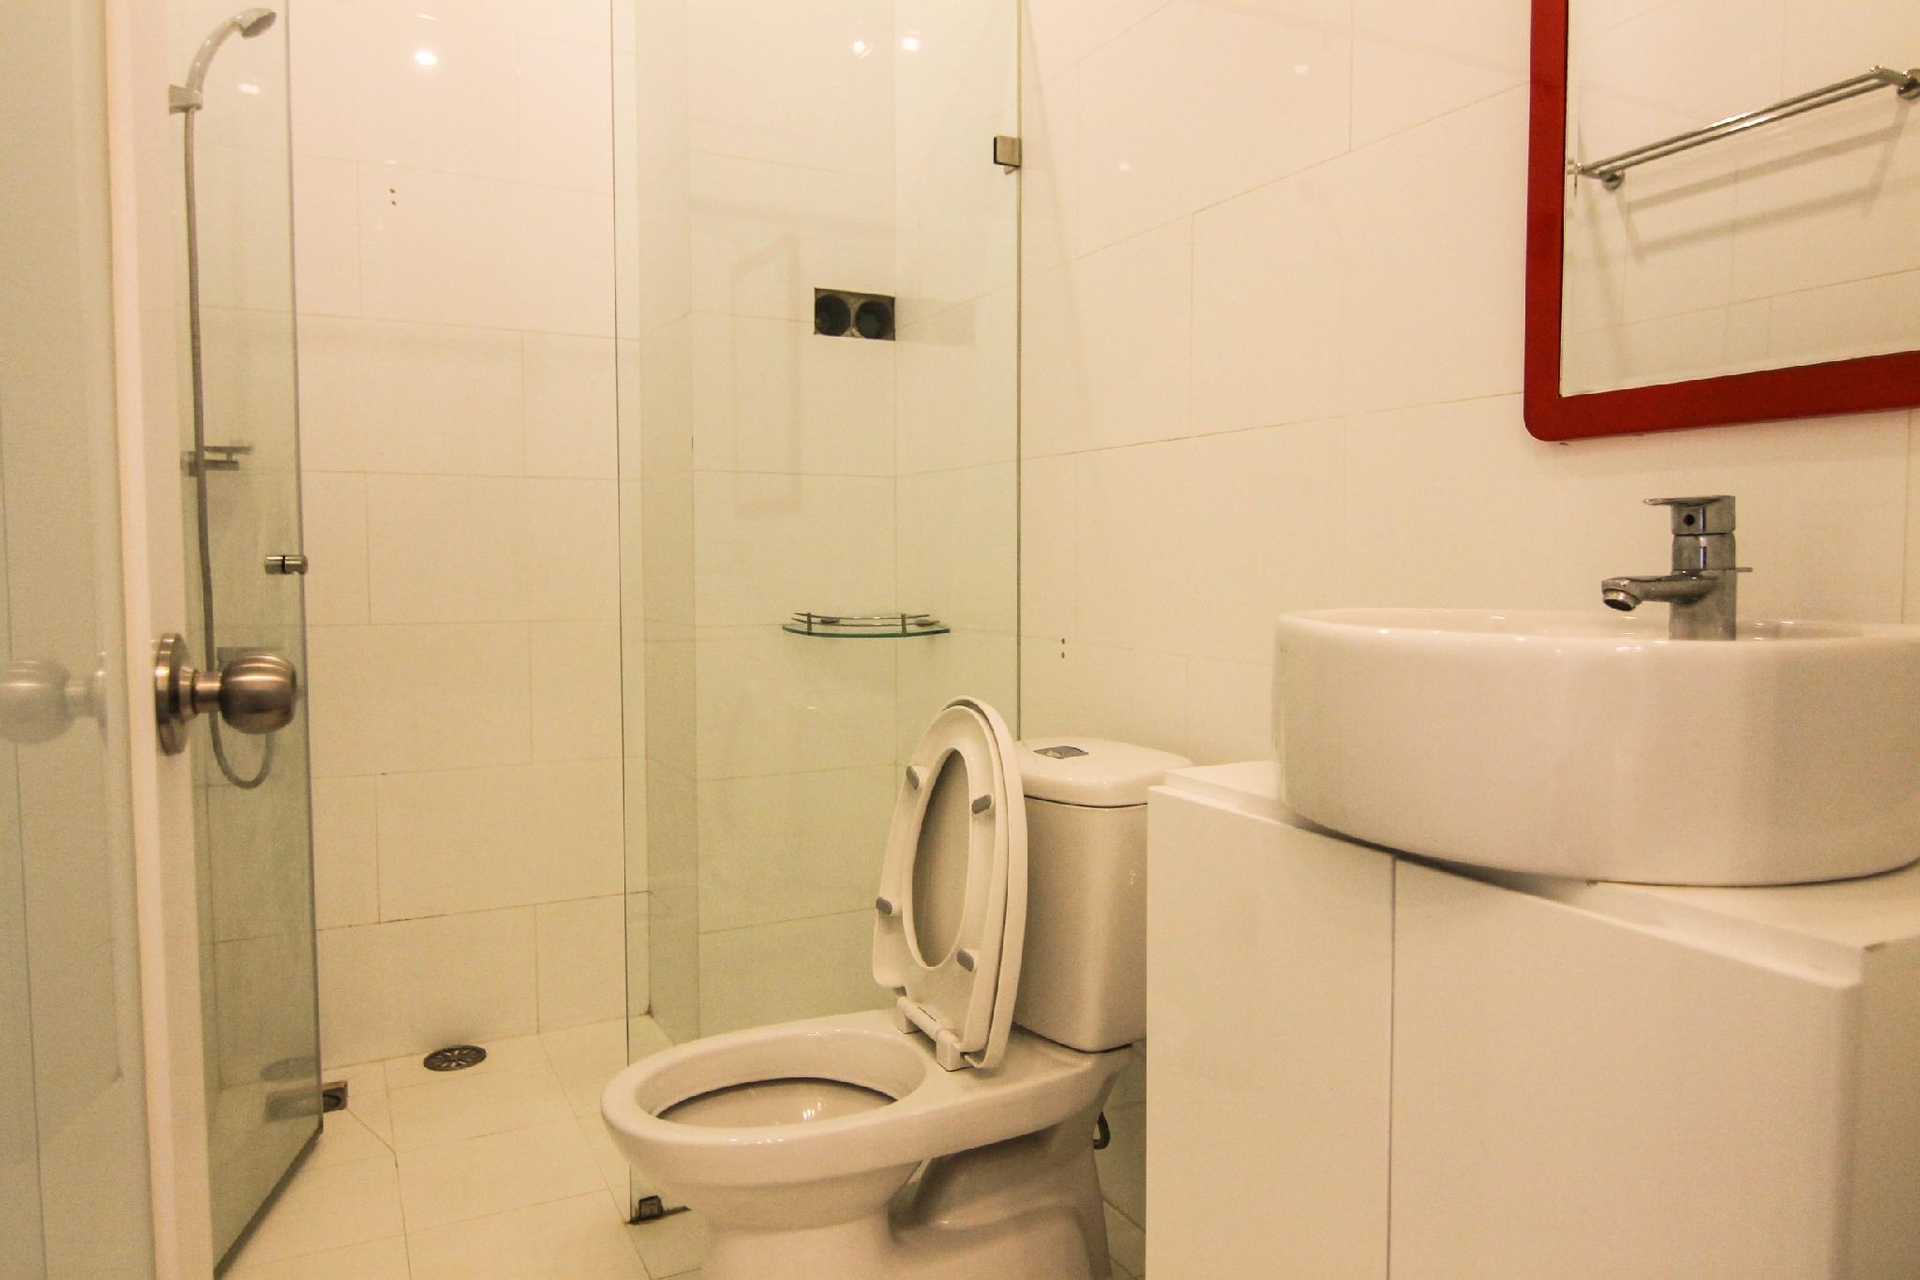 Bedroom 3, One Bedroom Apartment with balcony near market, Quận 8